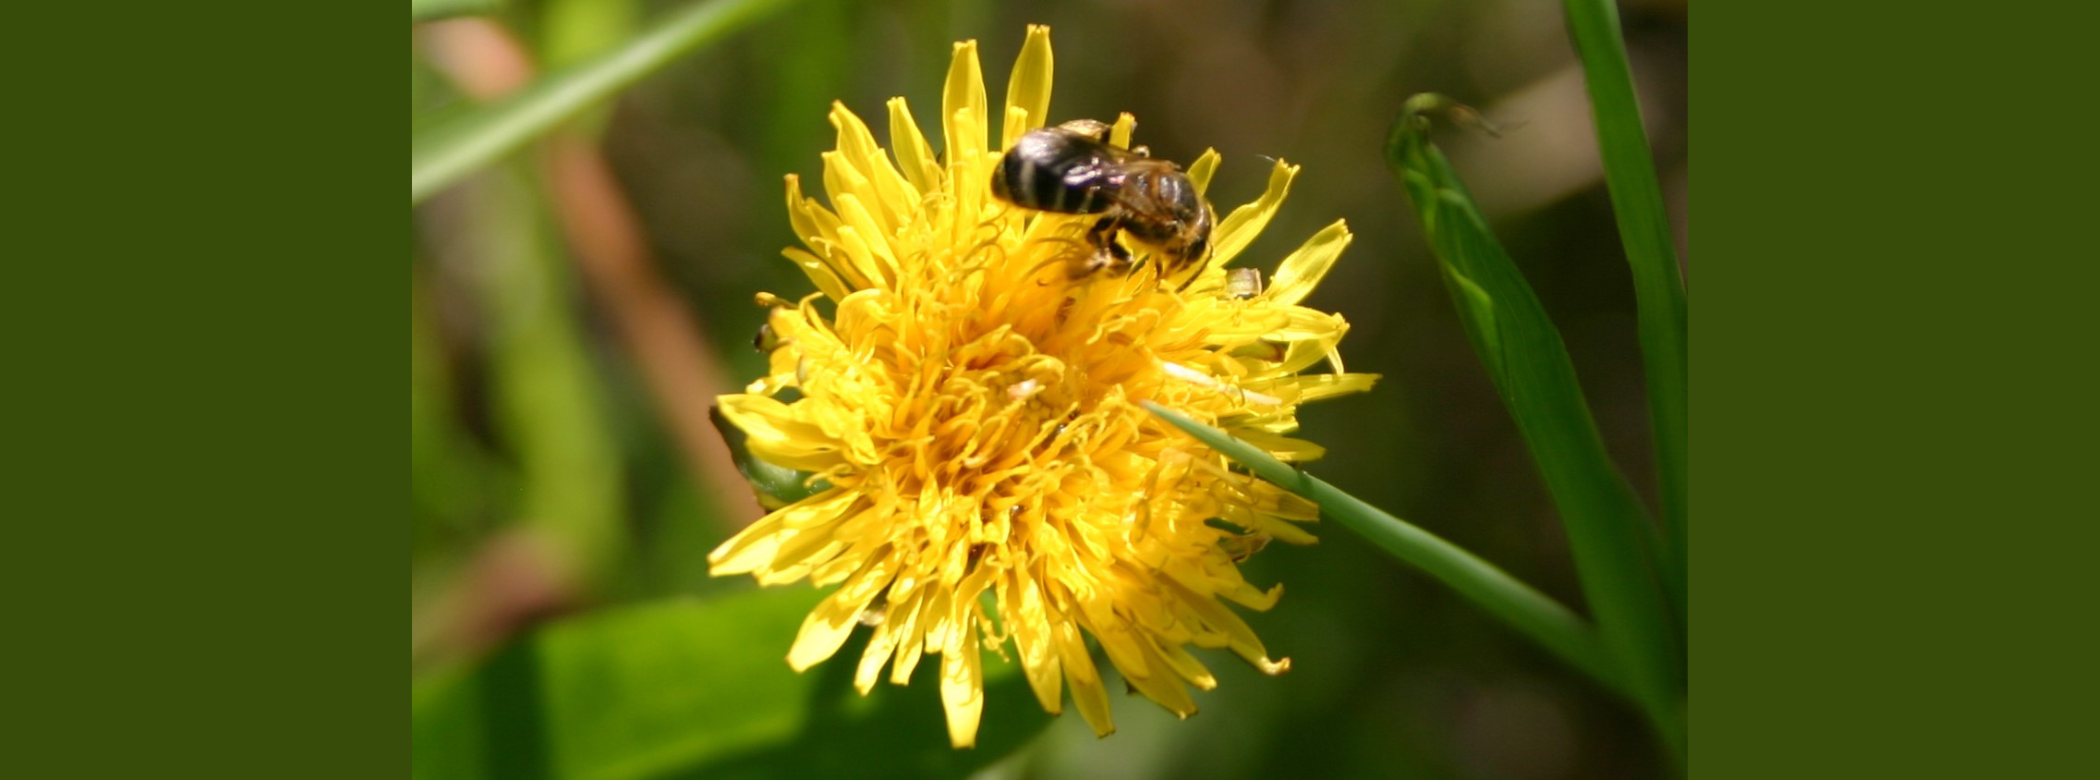 A close-up of a bee on a yellow dandelion head.